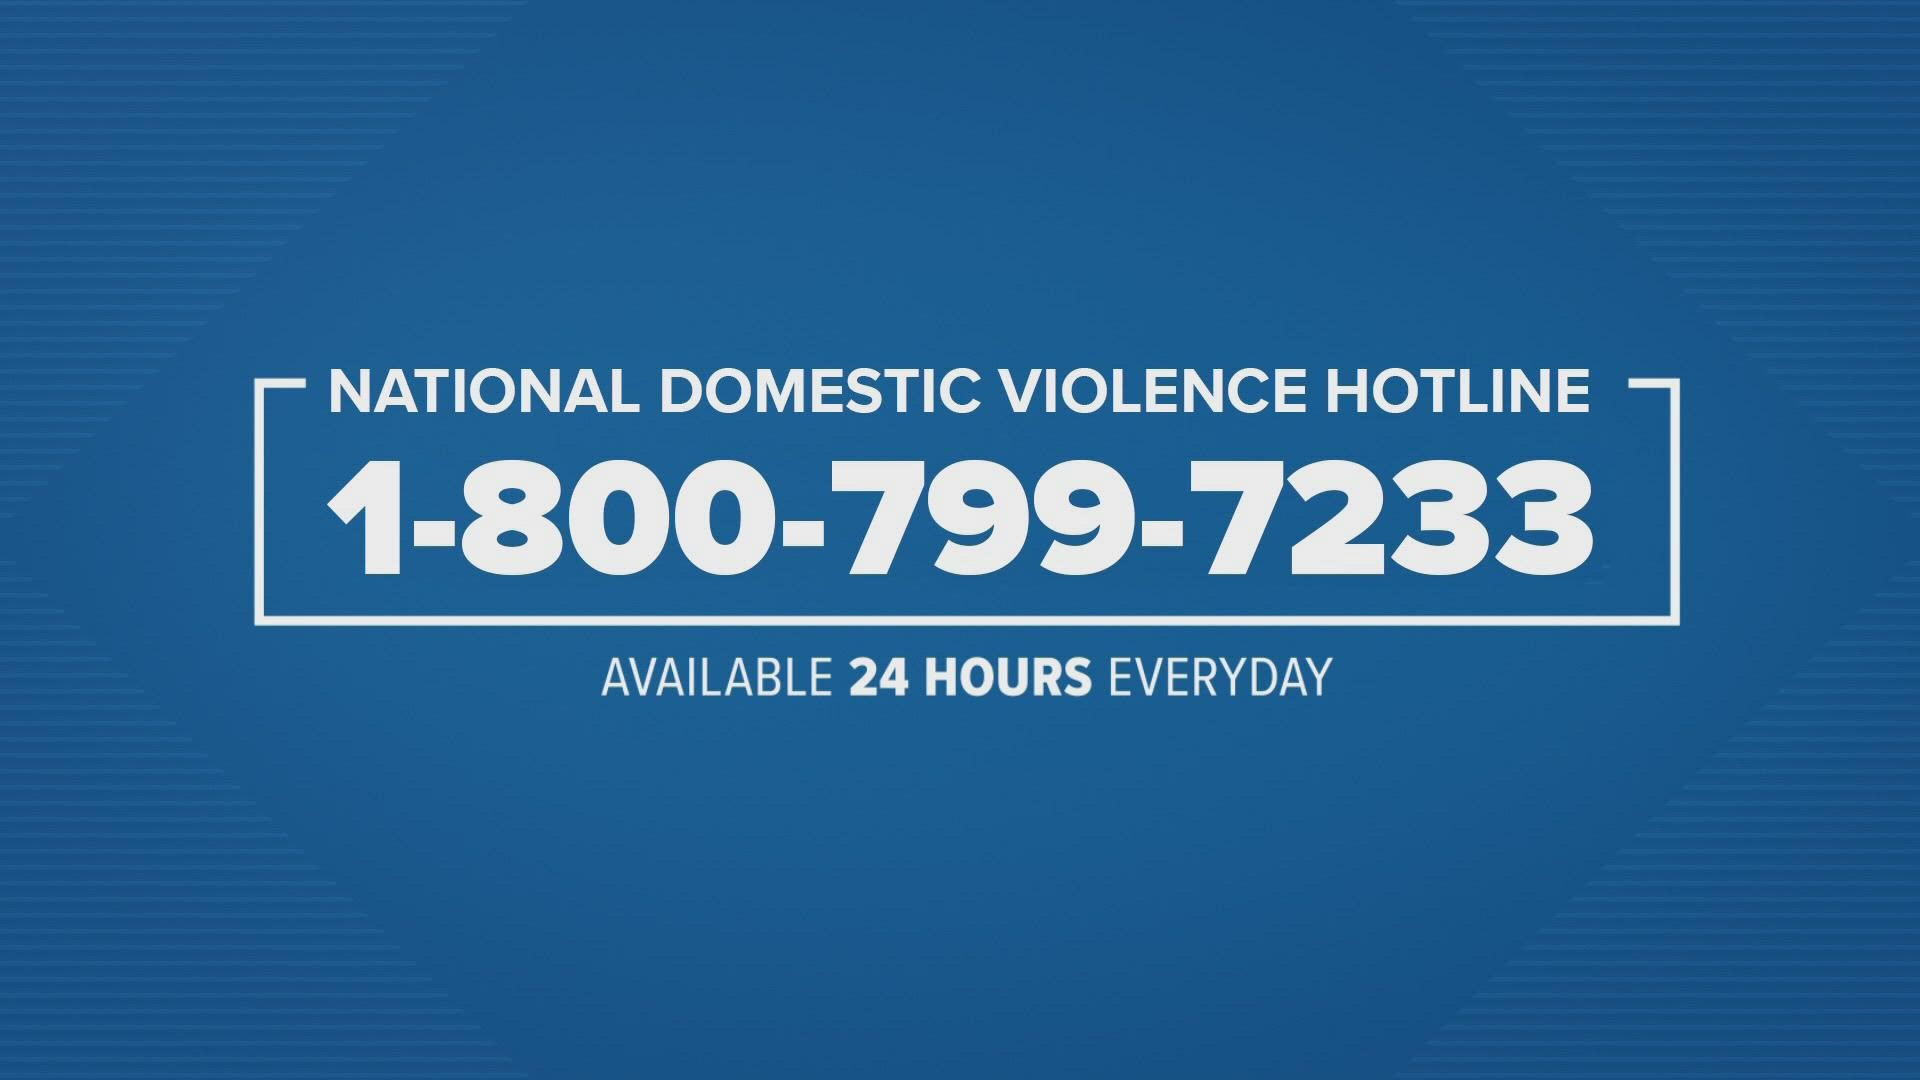 On average, nearly 20 people per minute are physically abused by an intimate partner in the United States.